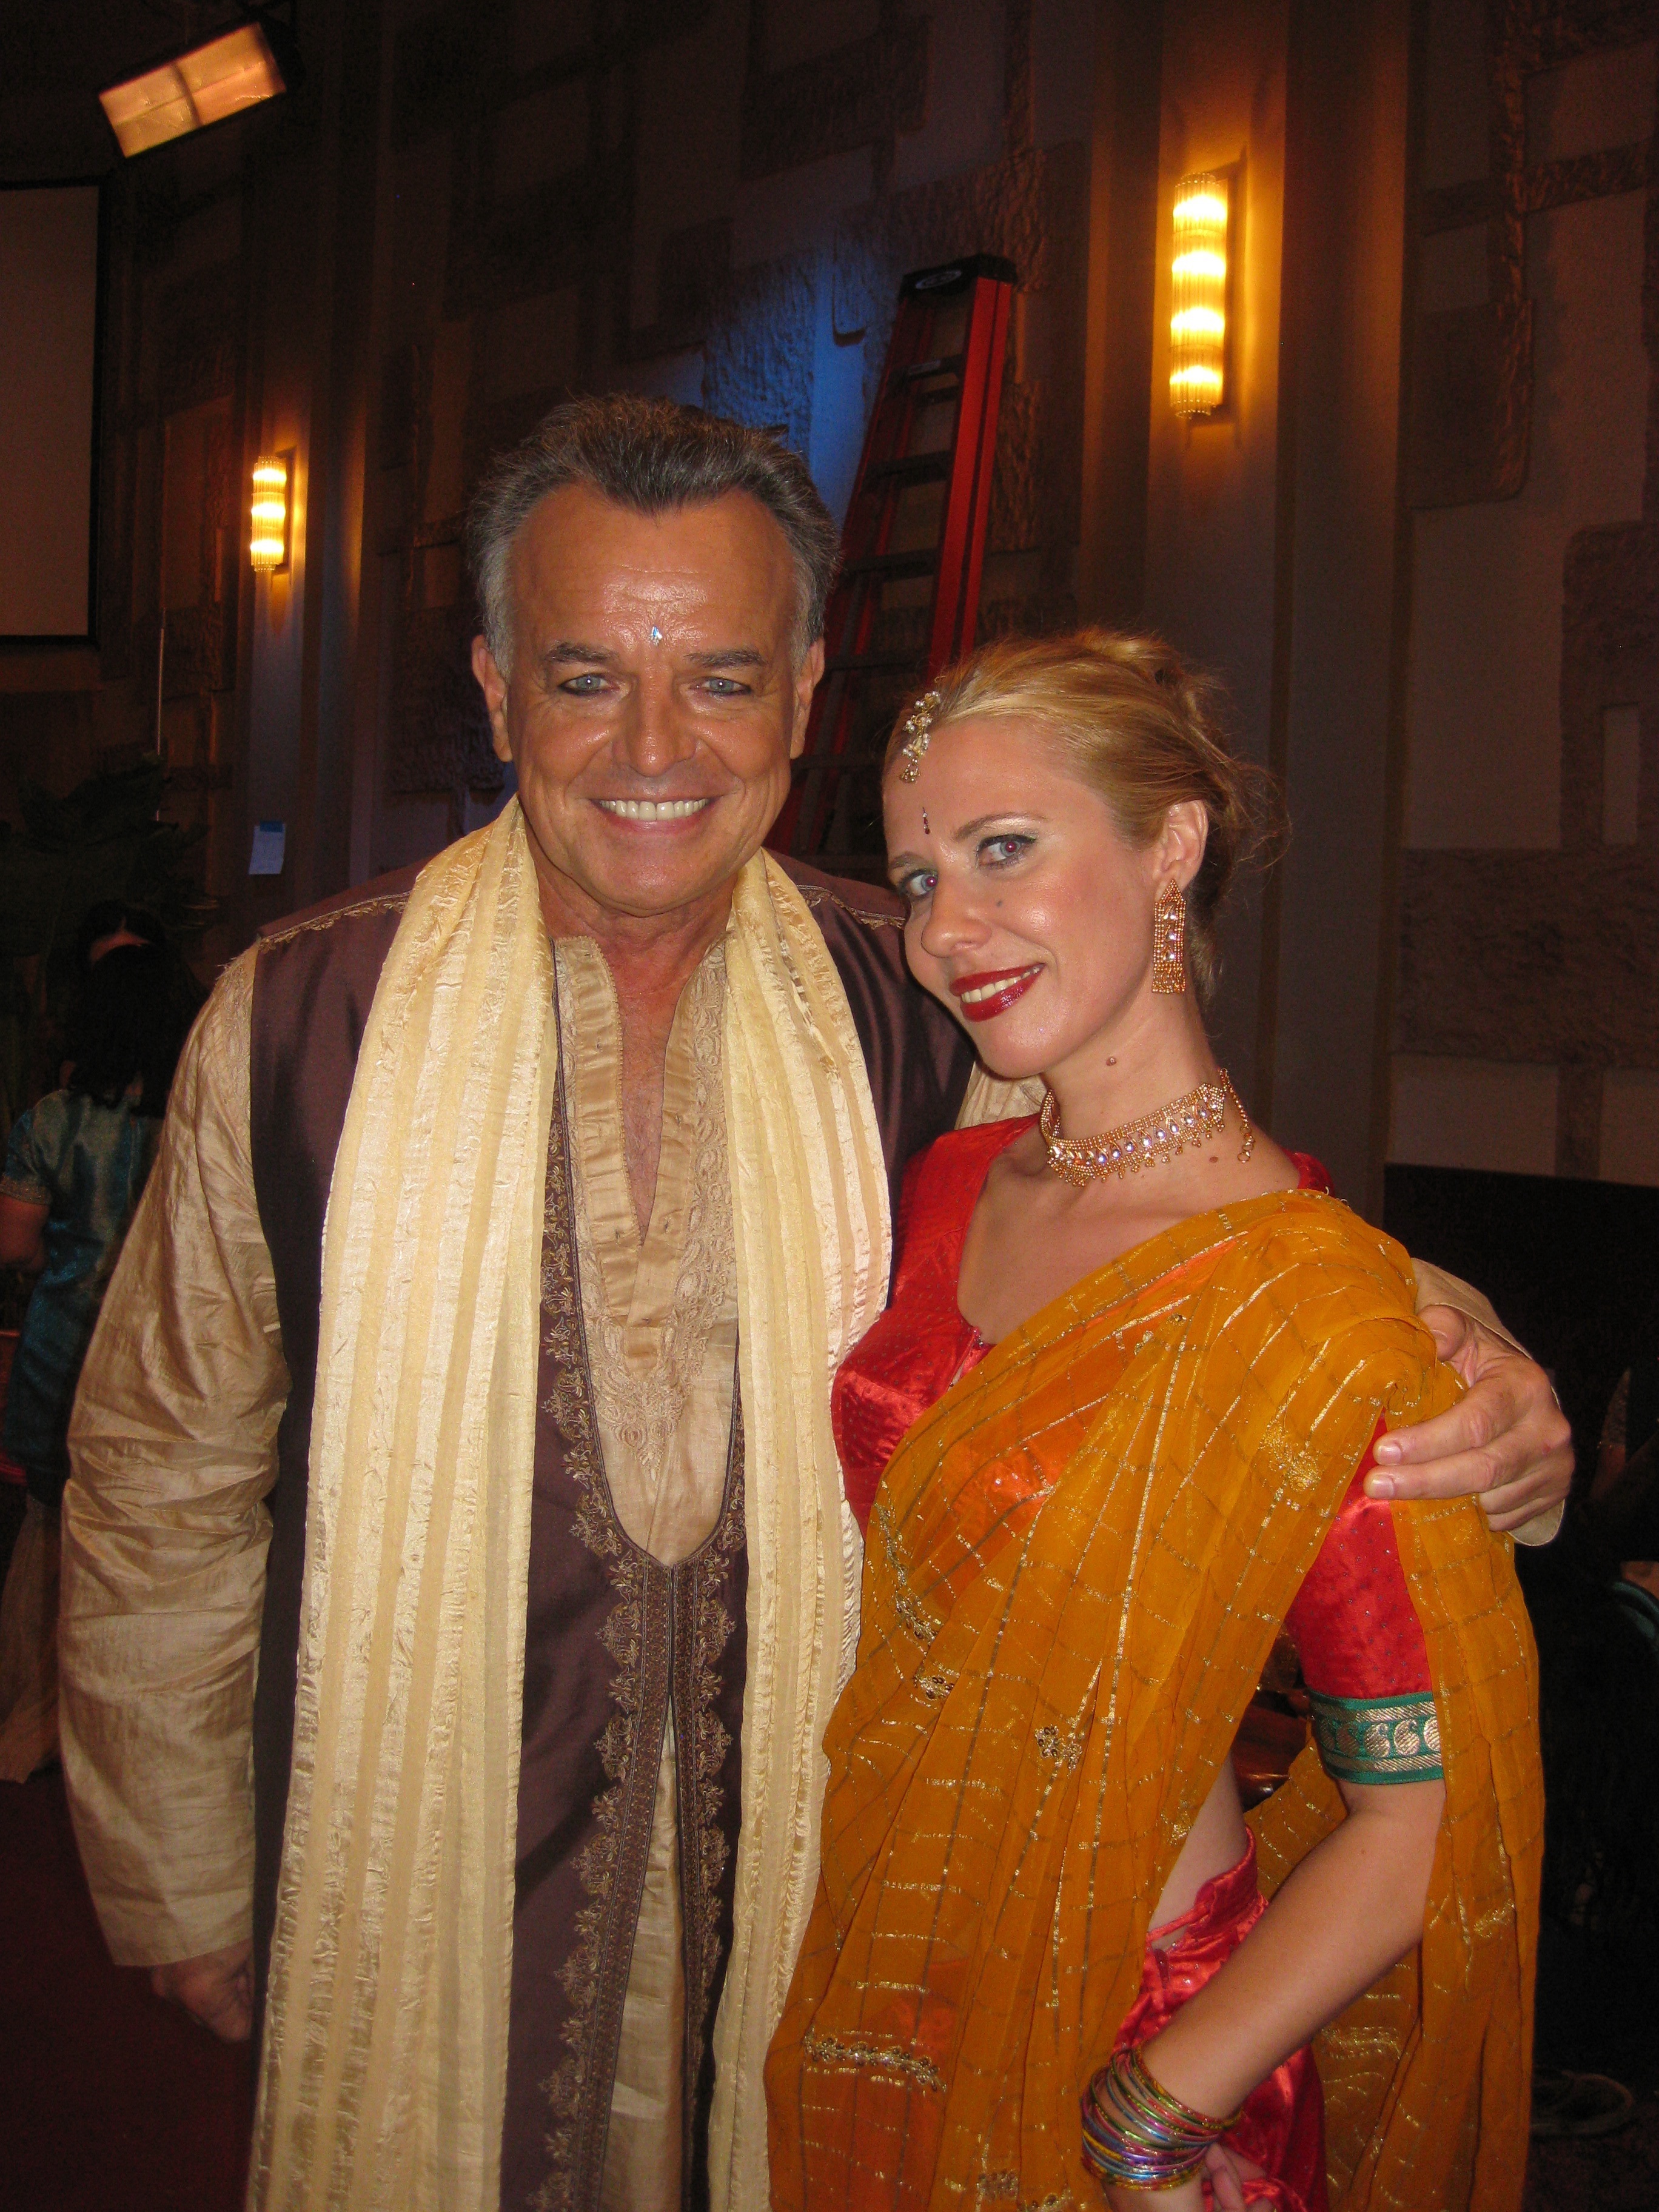 Ray Wise and Delka Nenkova on set of 